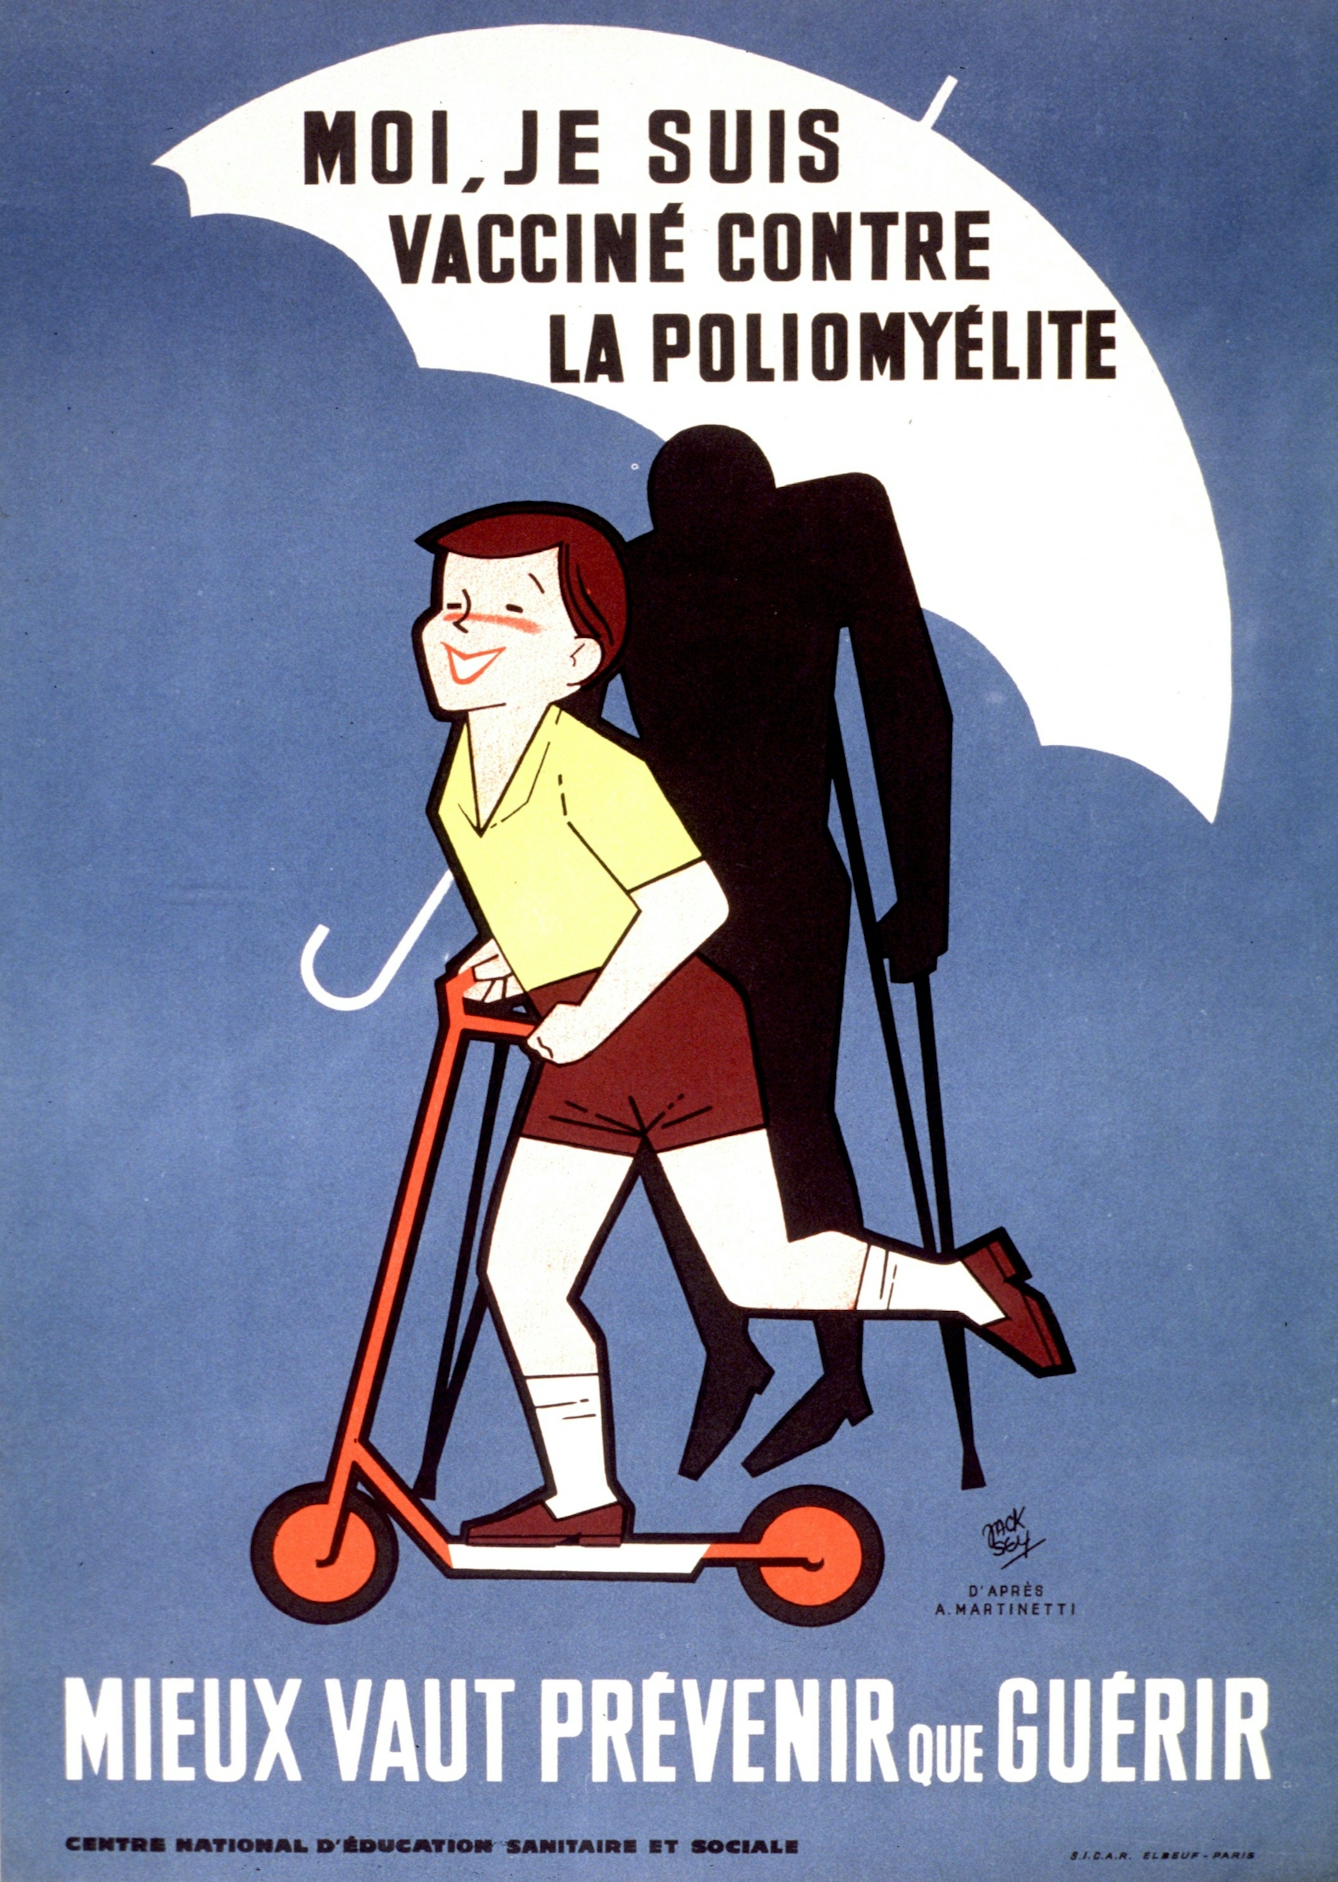 Poster of a young boy riding a scooter, with an umbrella over his head showing that he has been vaccinated against polio. The shadow of a person on crutches, not under the protection of the umbrella, is in the background.